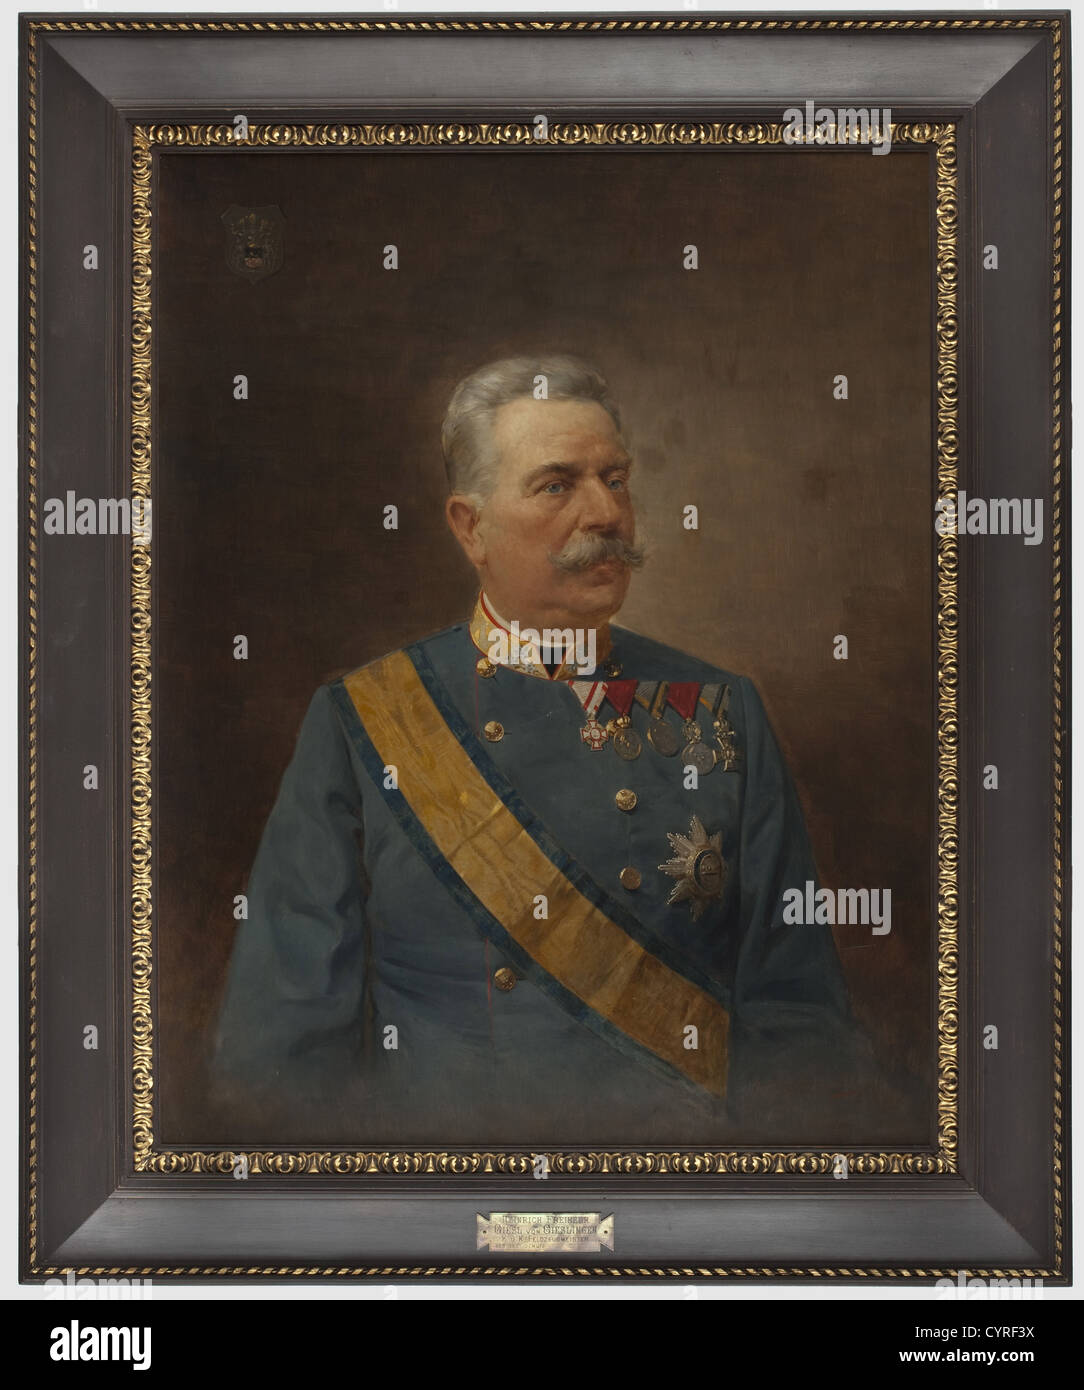 A portrait of Heinrich Baron Giesel von Gieslingen (1821 - 1905), Studio of Carl Pietzner Oil on canvas. Portrait of the K.u.K. Feldzeugmeister and proprietor of the 16th infantry regiment, wearing a tunic and sash and Grand Cross of the Order of the Iron Crown and further decorations. Family coat of arms on the upper left. Signed on the lower left 'K.u.K. Hofatelier Pietzner Wien'. 70 x 52 cm. The Pietzner studio in the Mariahilferstraße in Vienna was not only taking pictures but produced paintings based on photographs as well, people, 19th century, Imperial, , Stock Photo